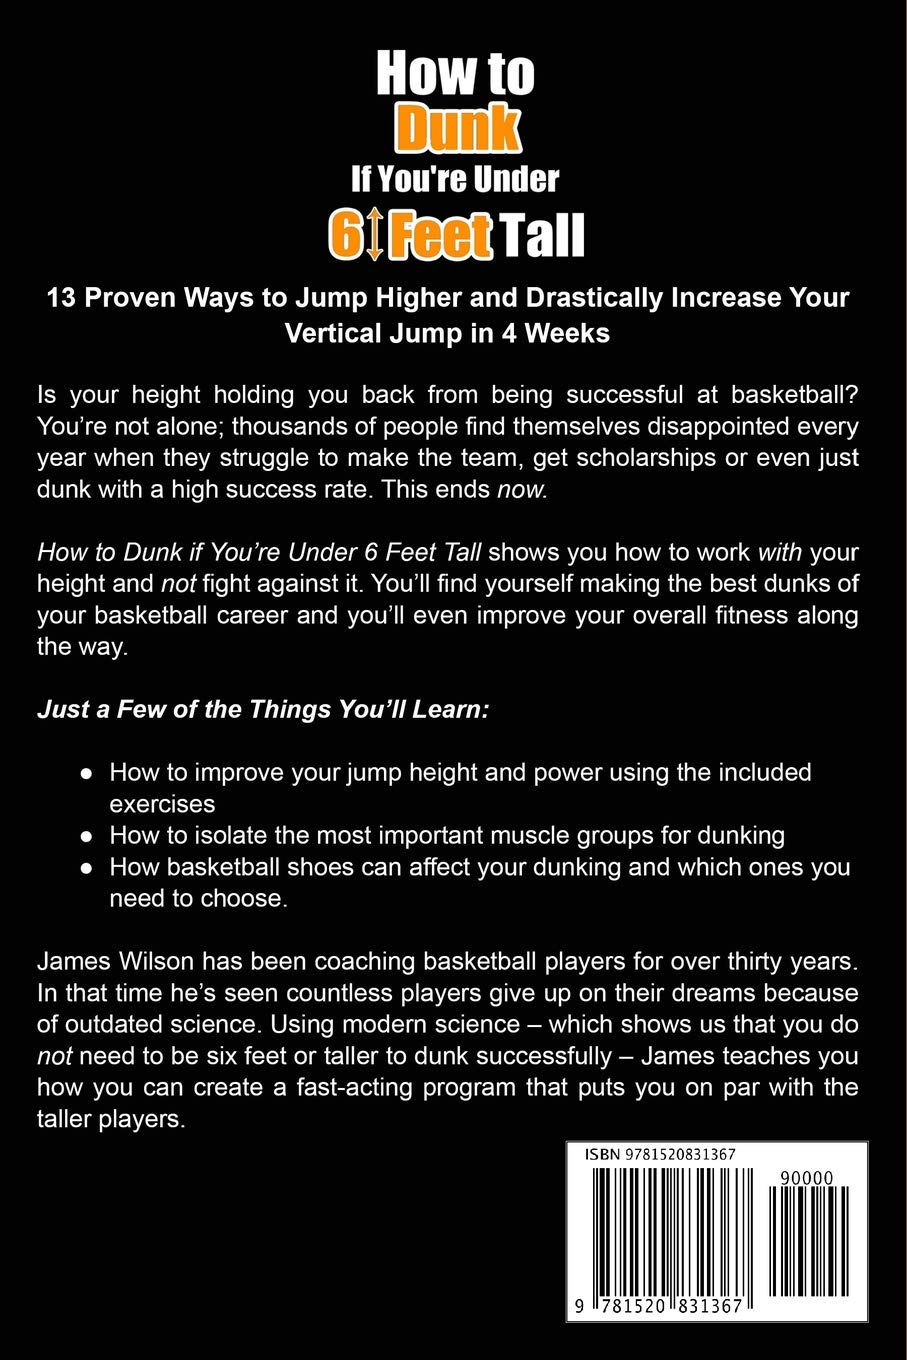 How to Dunk if You’re Under 6 Feet Tall: 13 Proven Ways to Jump Higher and Drastically Increase Your Vertical Jump in 4 Weeks (Vertical Jump Training Program in Color)